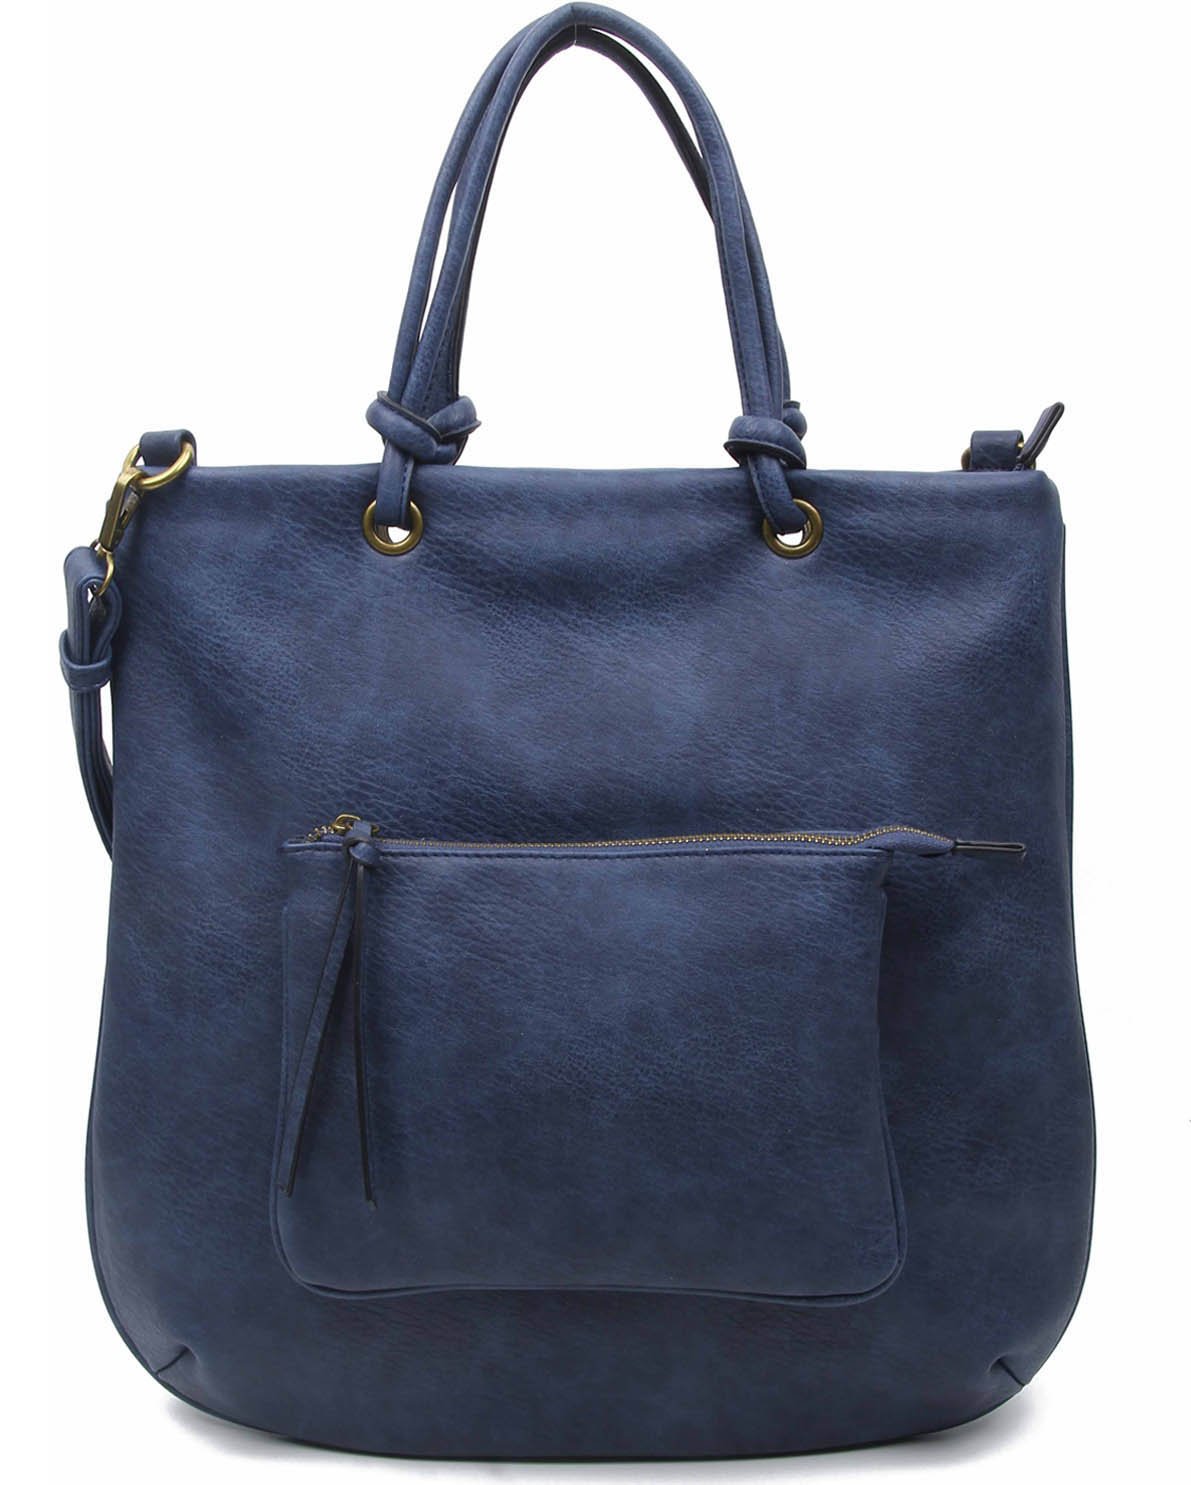 Ampere Creations Addison Tote Bag